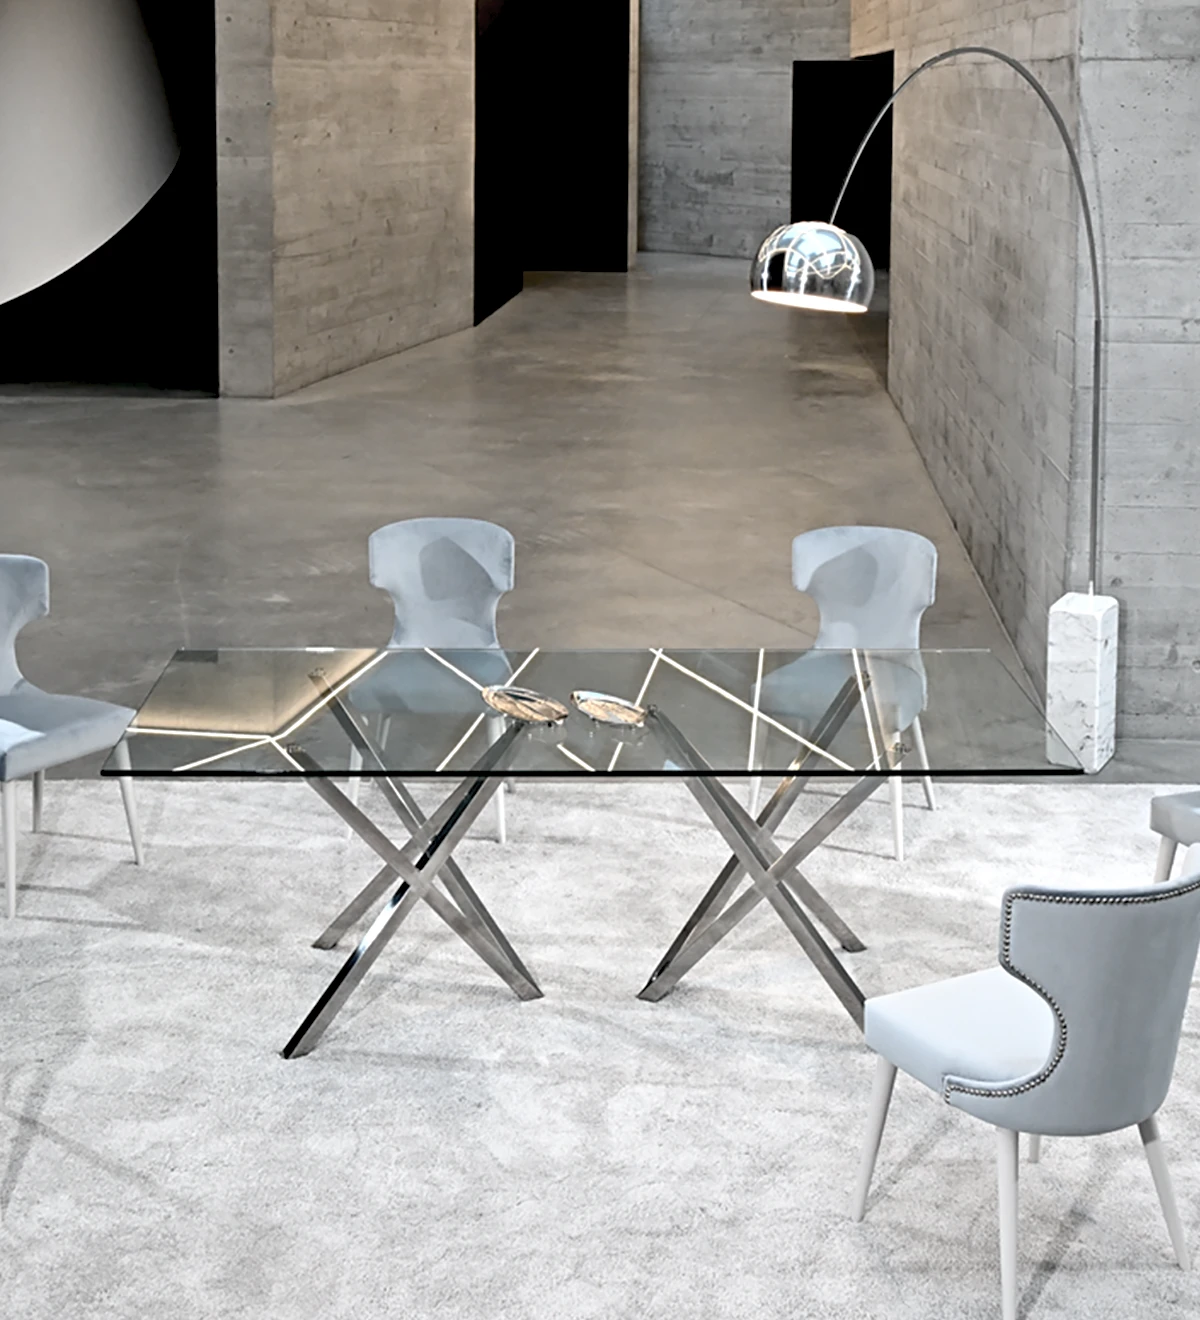 Rectangular dining table with glass top and stainless steel legs.